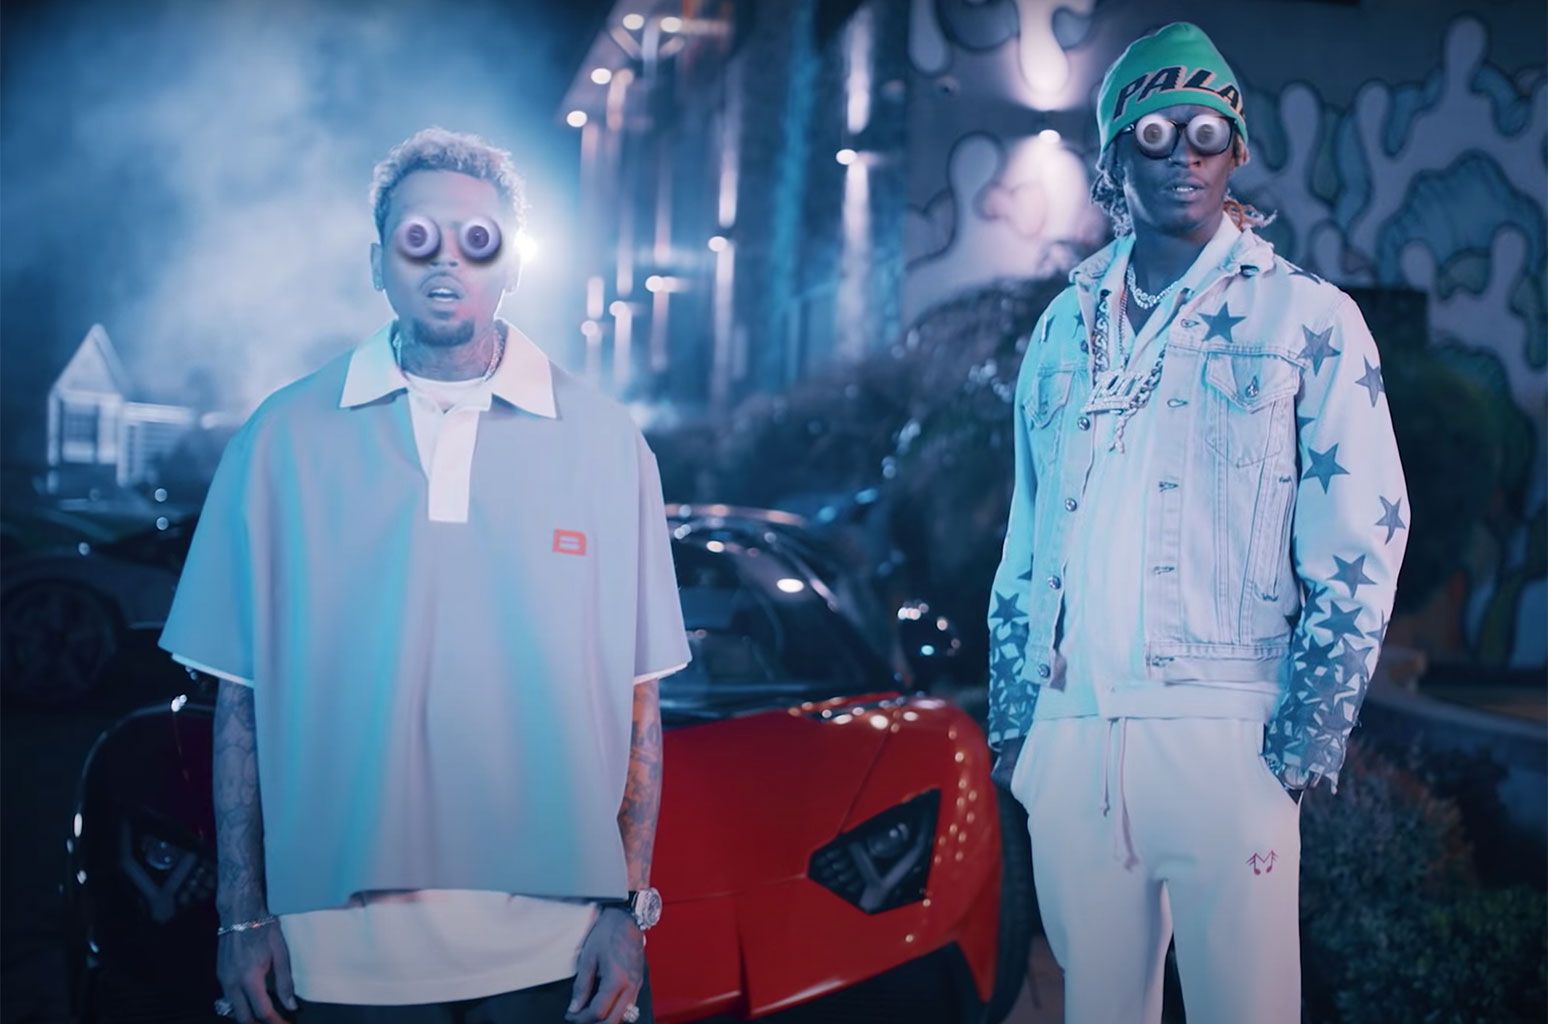 Chris Brown & Young Thug's 'Go Crazy' Tops R&B Hip Hop Airplay